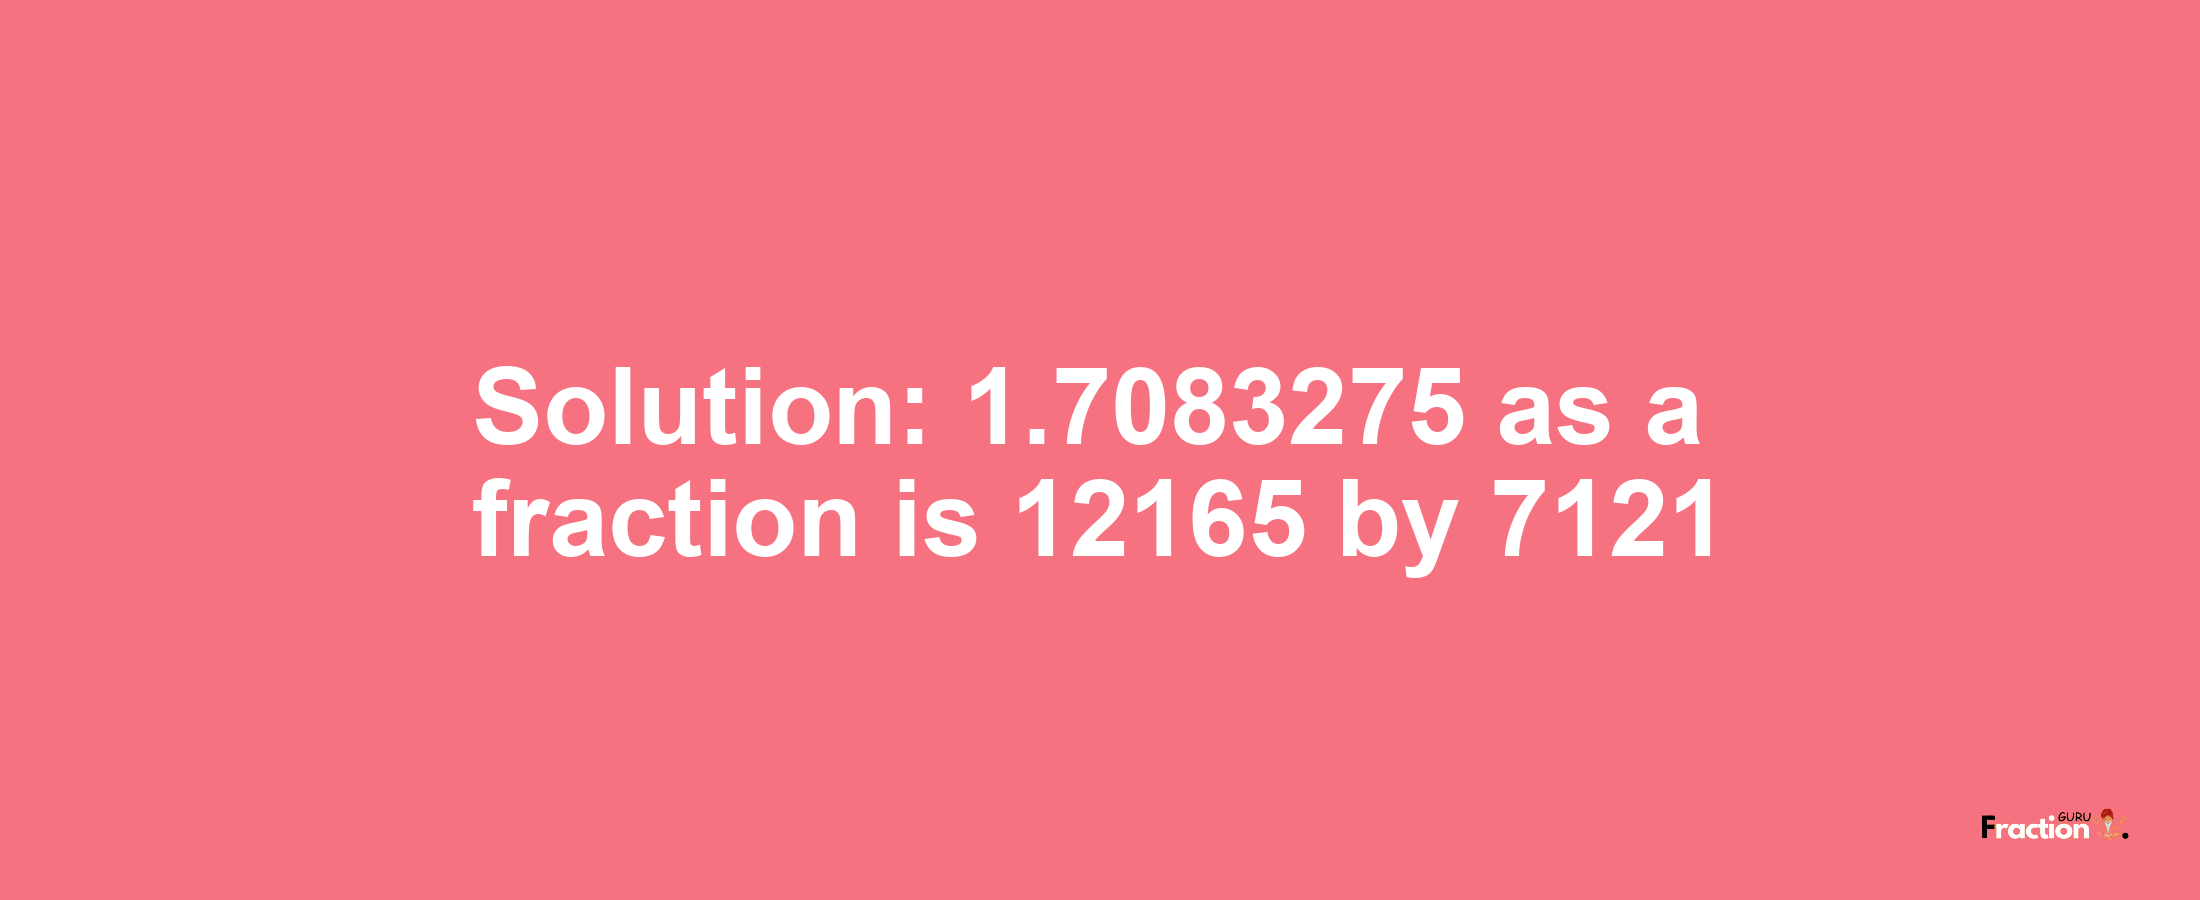 Solution:1.7083275 as a fraction is 12165/7121